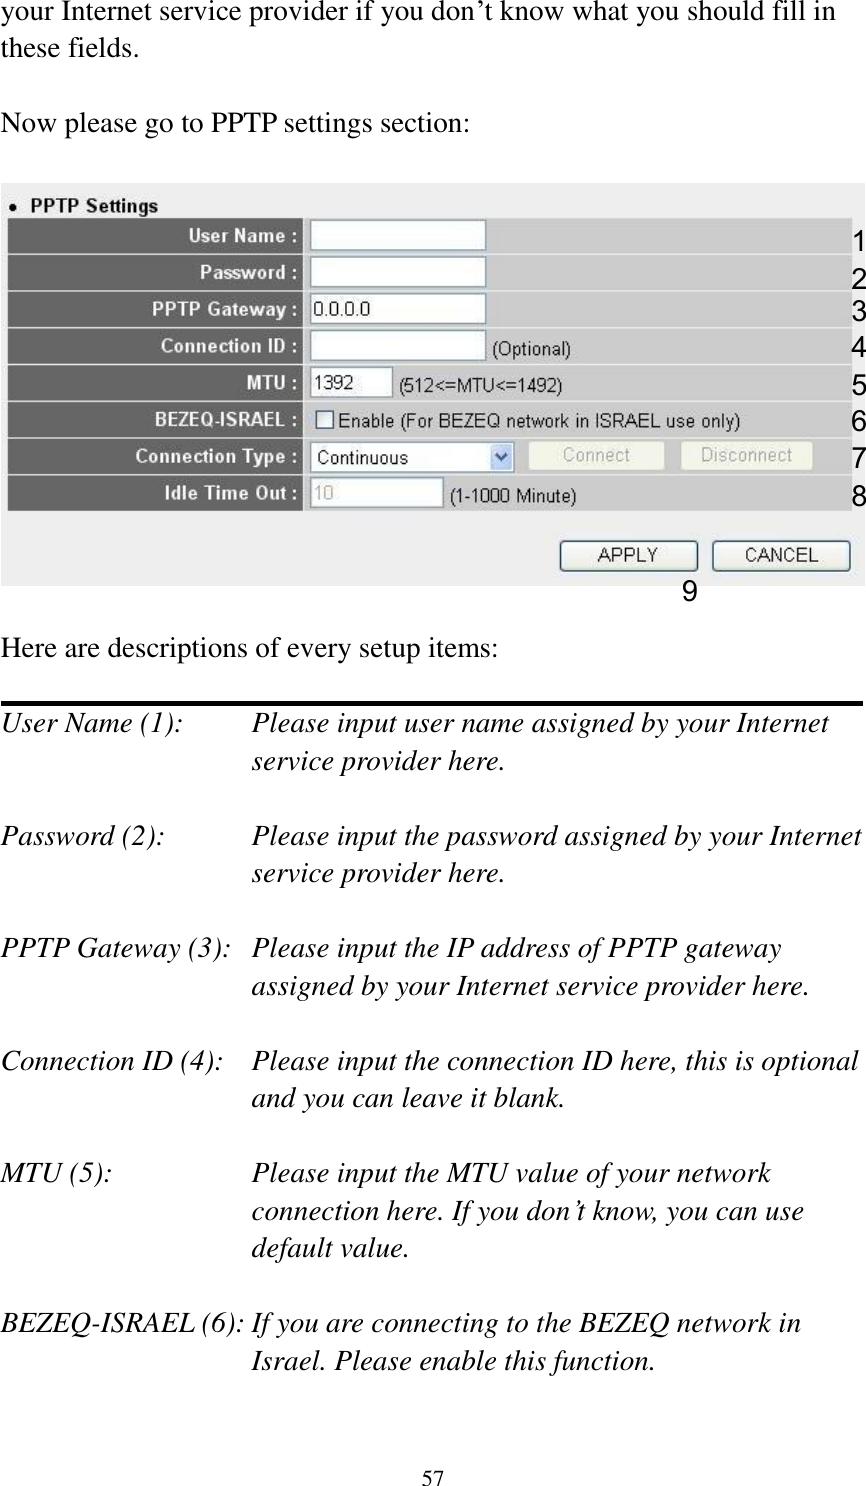 57 your Internet service provider if you don‟t know what you should fill in these fields.  Now please go to PPTP settings section:     Here are descriptions of every setup items:  User Name (1):    Please input user name assigned by your Internet service provider here.  Password (2):    Please input the password assigned by your Internet service provider here.  PPTP Gateway (3):   Please input the IP address of PPTP gateway assigned by your Internet service provider here.  Connection ID (4):    Please input the connection ID here, this is optional and you can leave it blank.  MTU (5):    Please input the MTU value of your network connection here. If you don‟t know, you can use default value.  BEZEQ-ISRAEL (6): If you are connecting to the BEZEQ network in Israel. Please enable this function.  1 2 3 4 5 7 8 9 6 